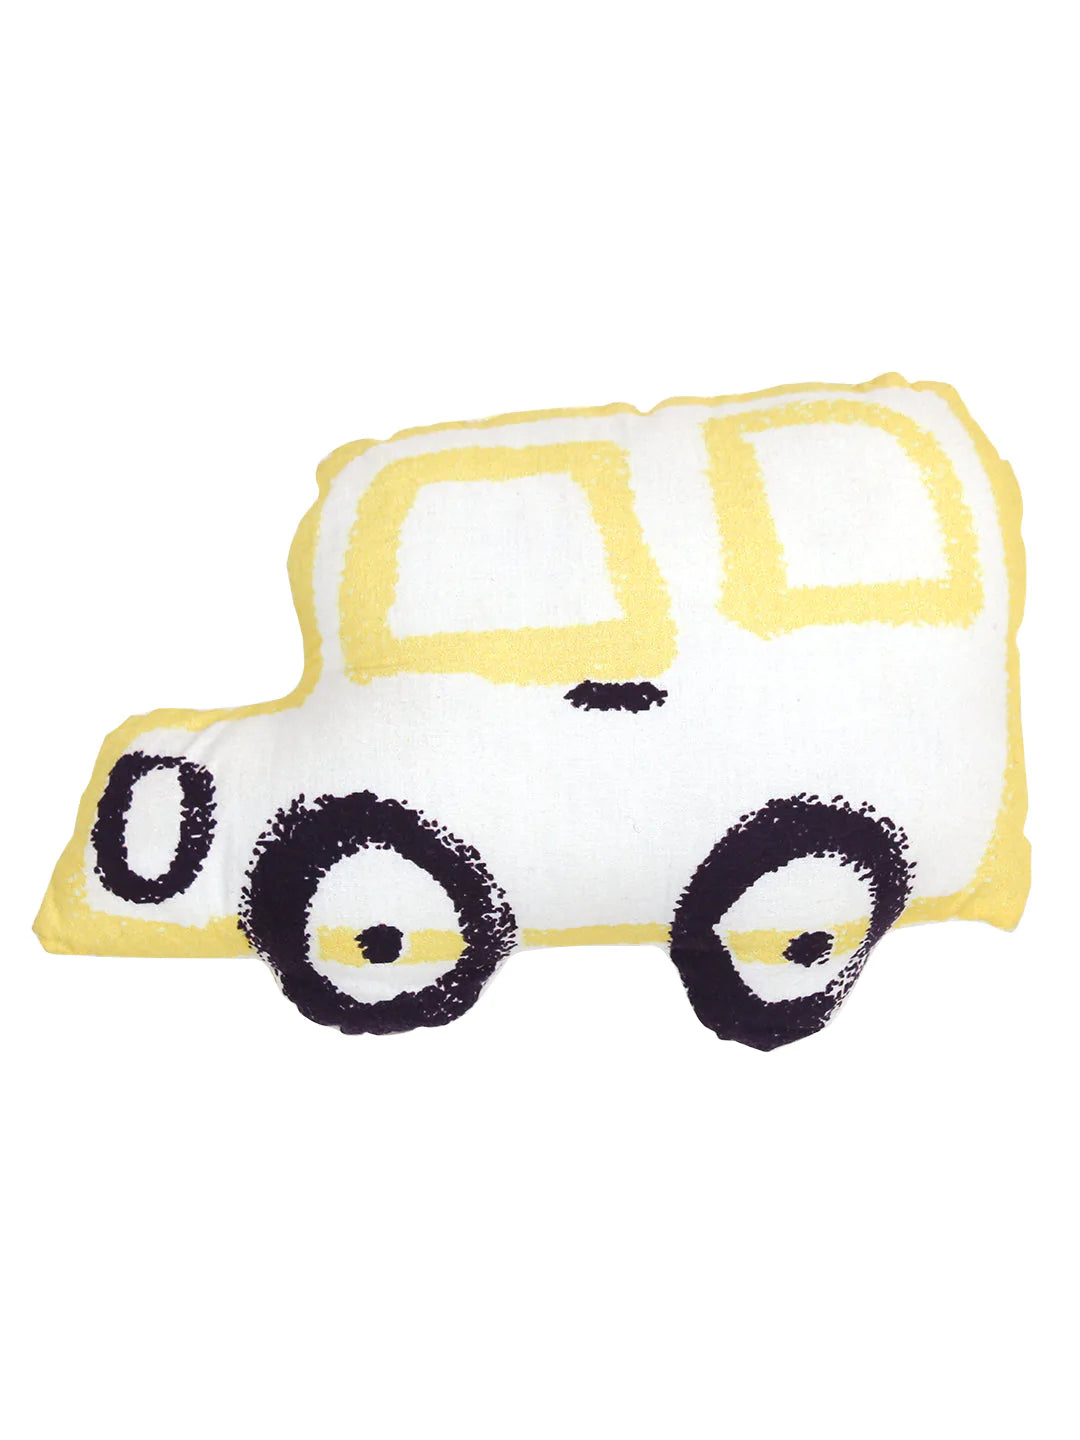 The Babys Dayout Cushion Cover